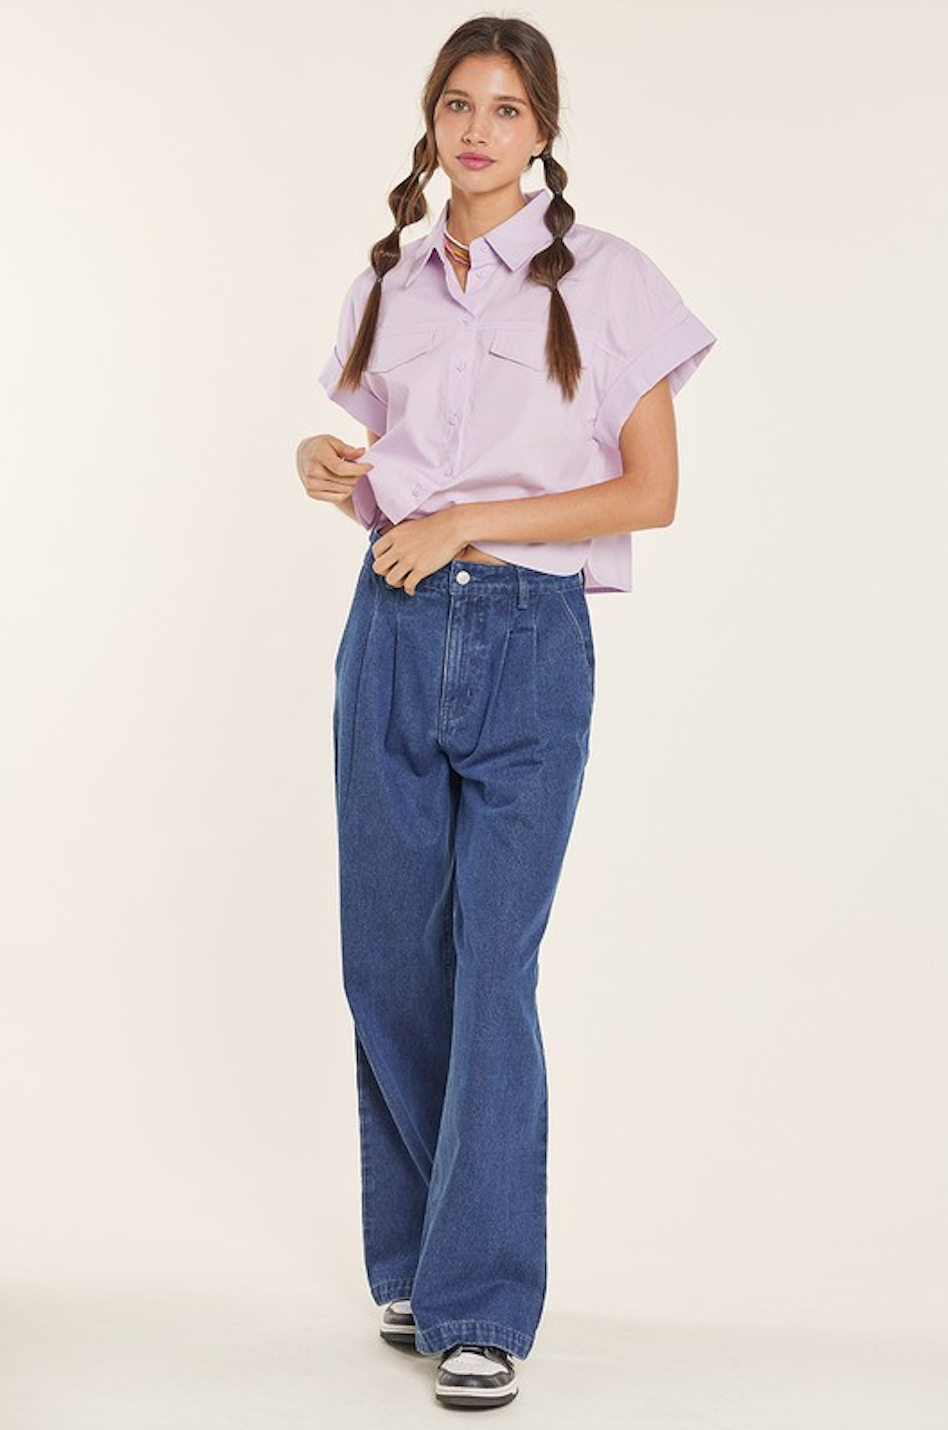 CLAIRE DROP SHOULDER ROLL UP BUTTON UP SHIRT IN LAVENDER